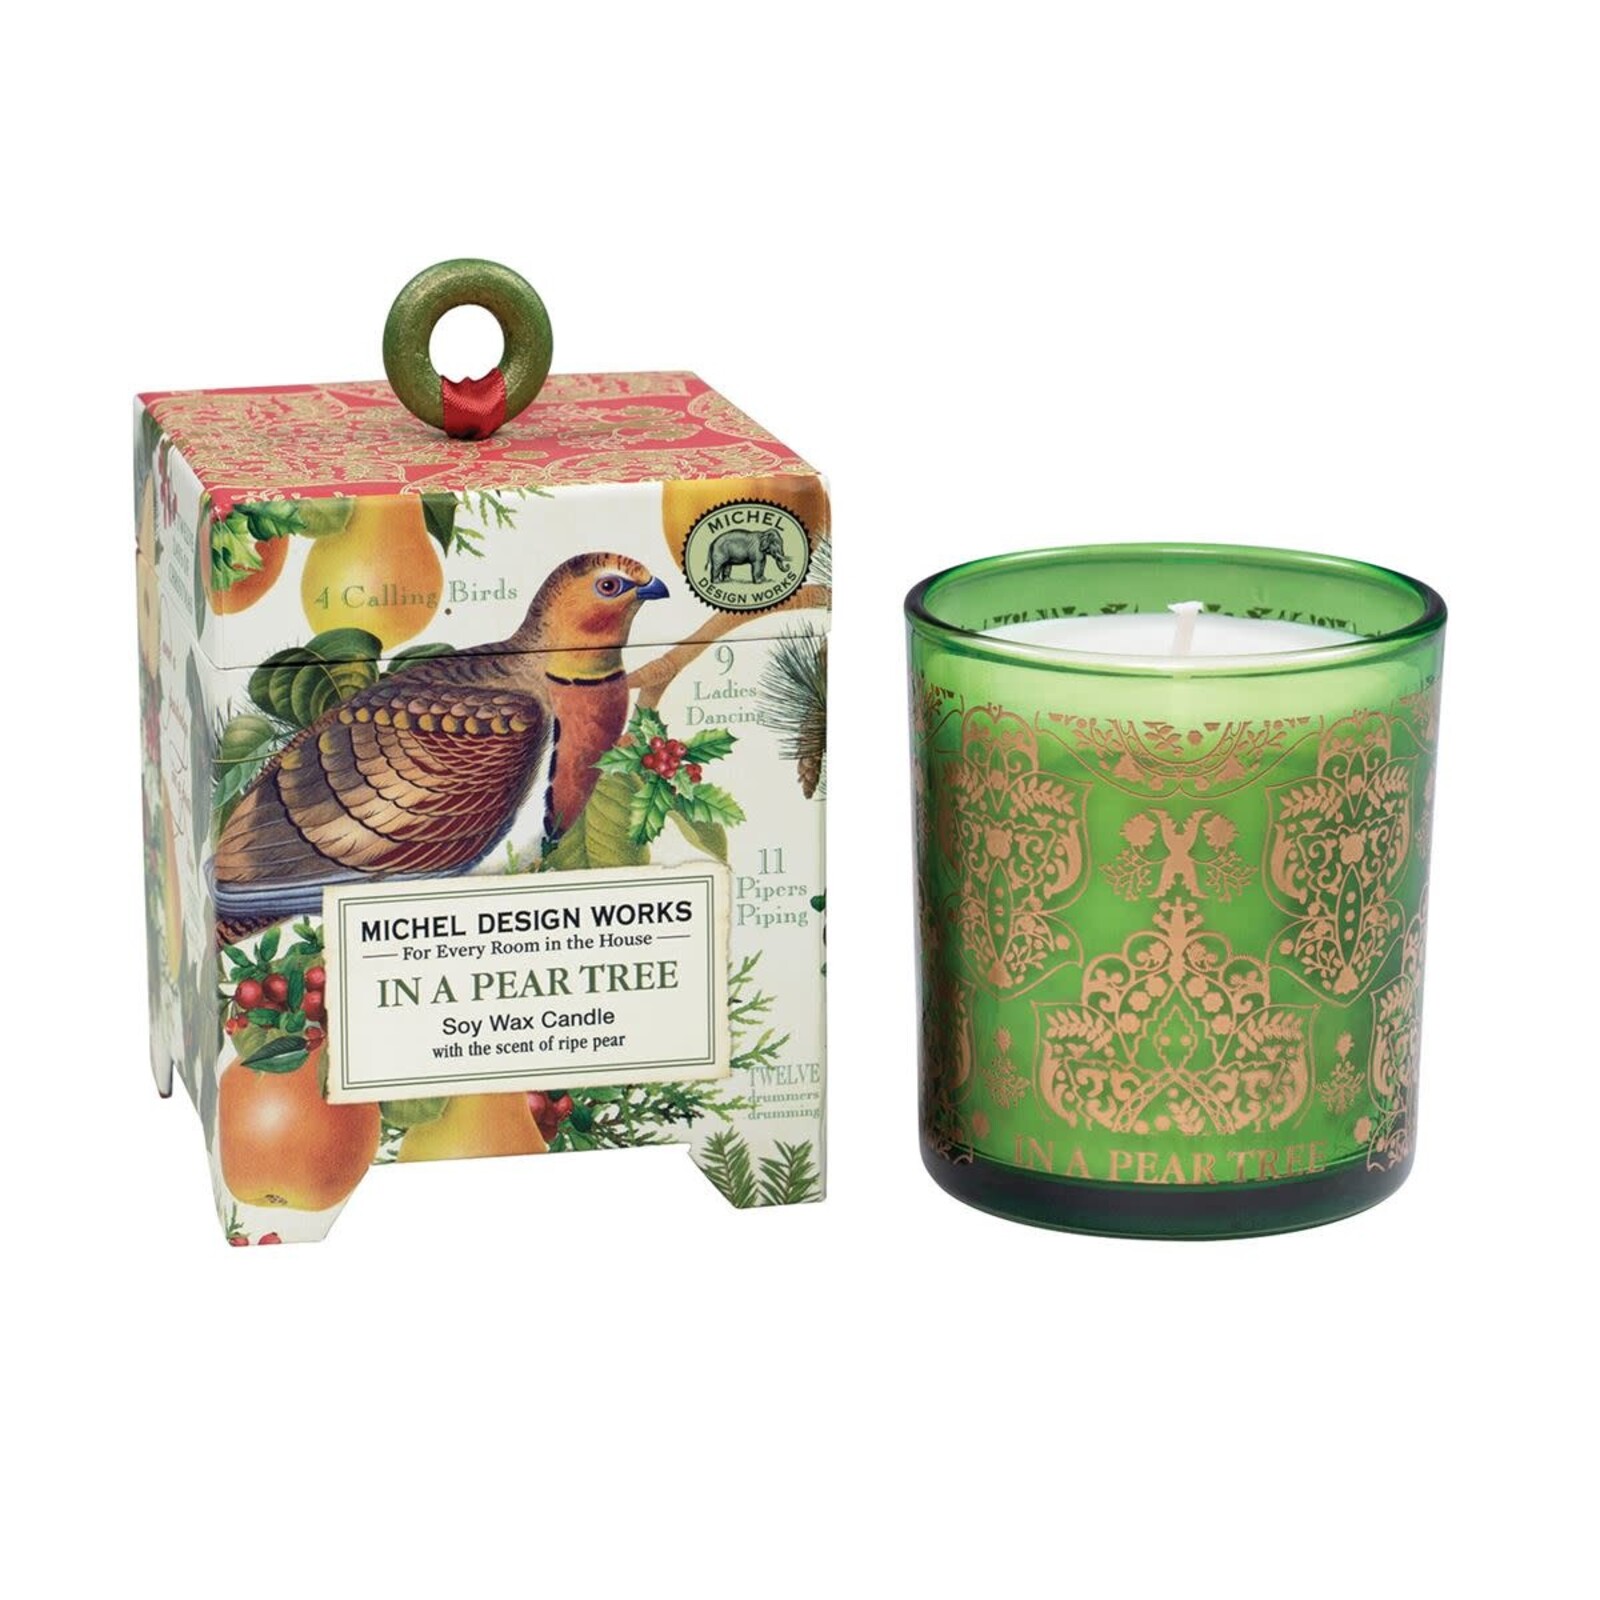 Michel Design Works In a Pear Tree 6.5 oz. Soy Wax Candle  CAN345 loading=